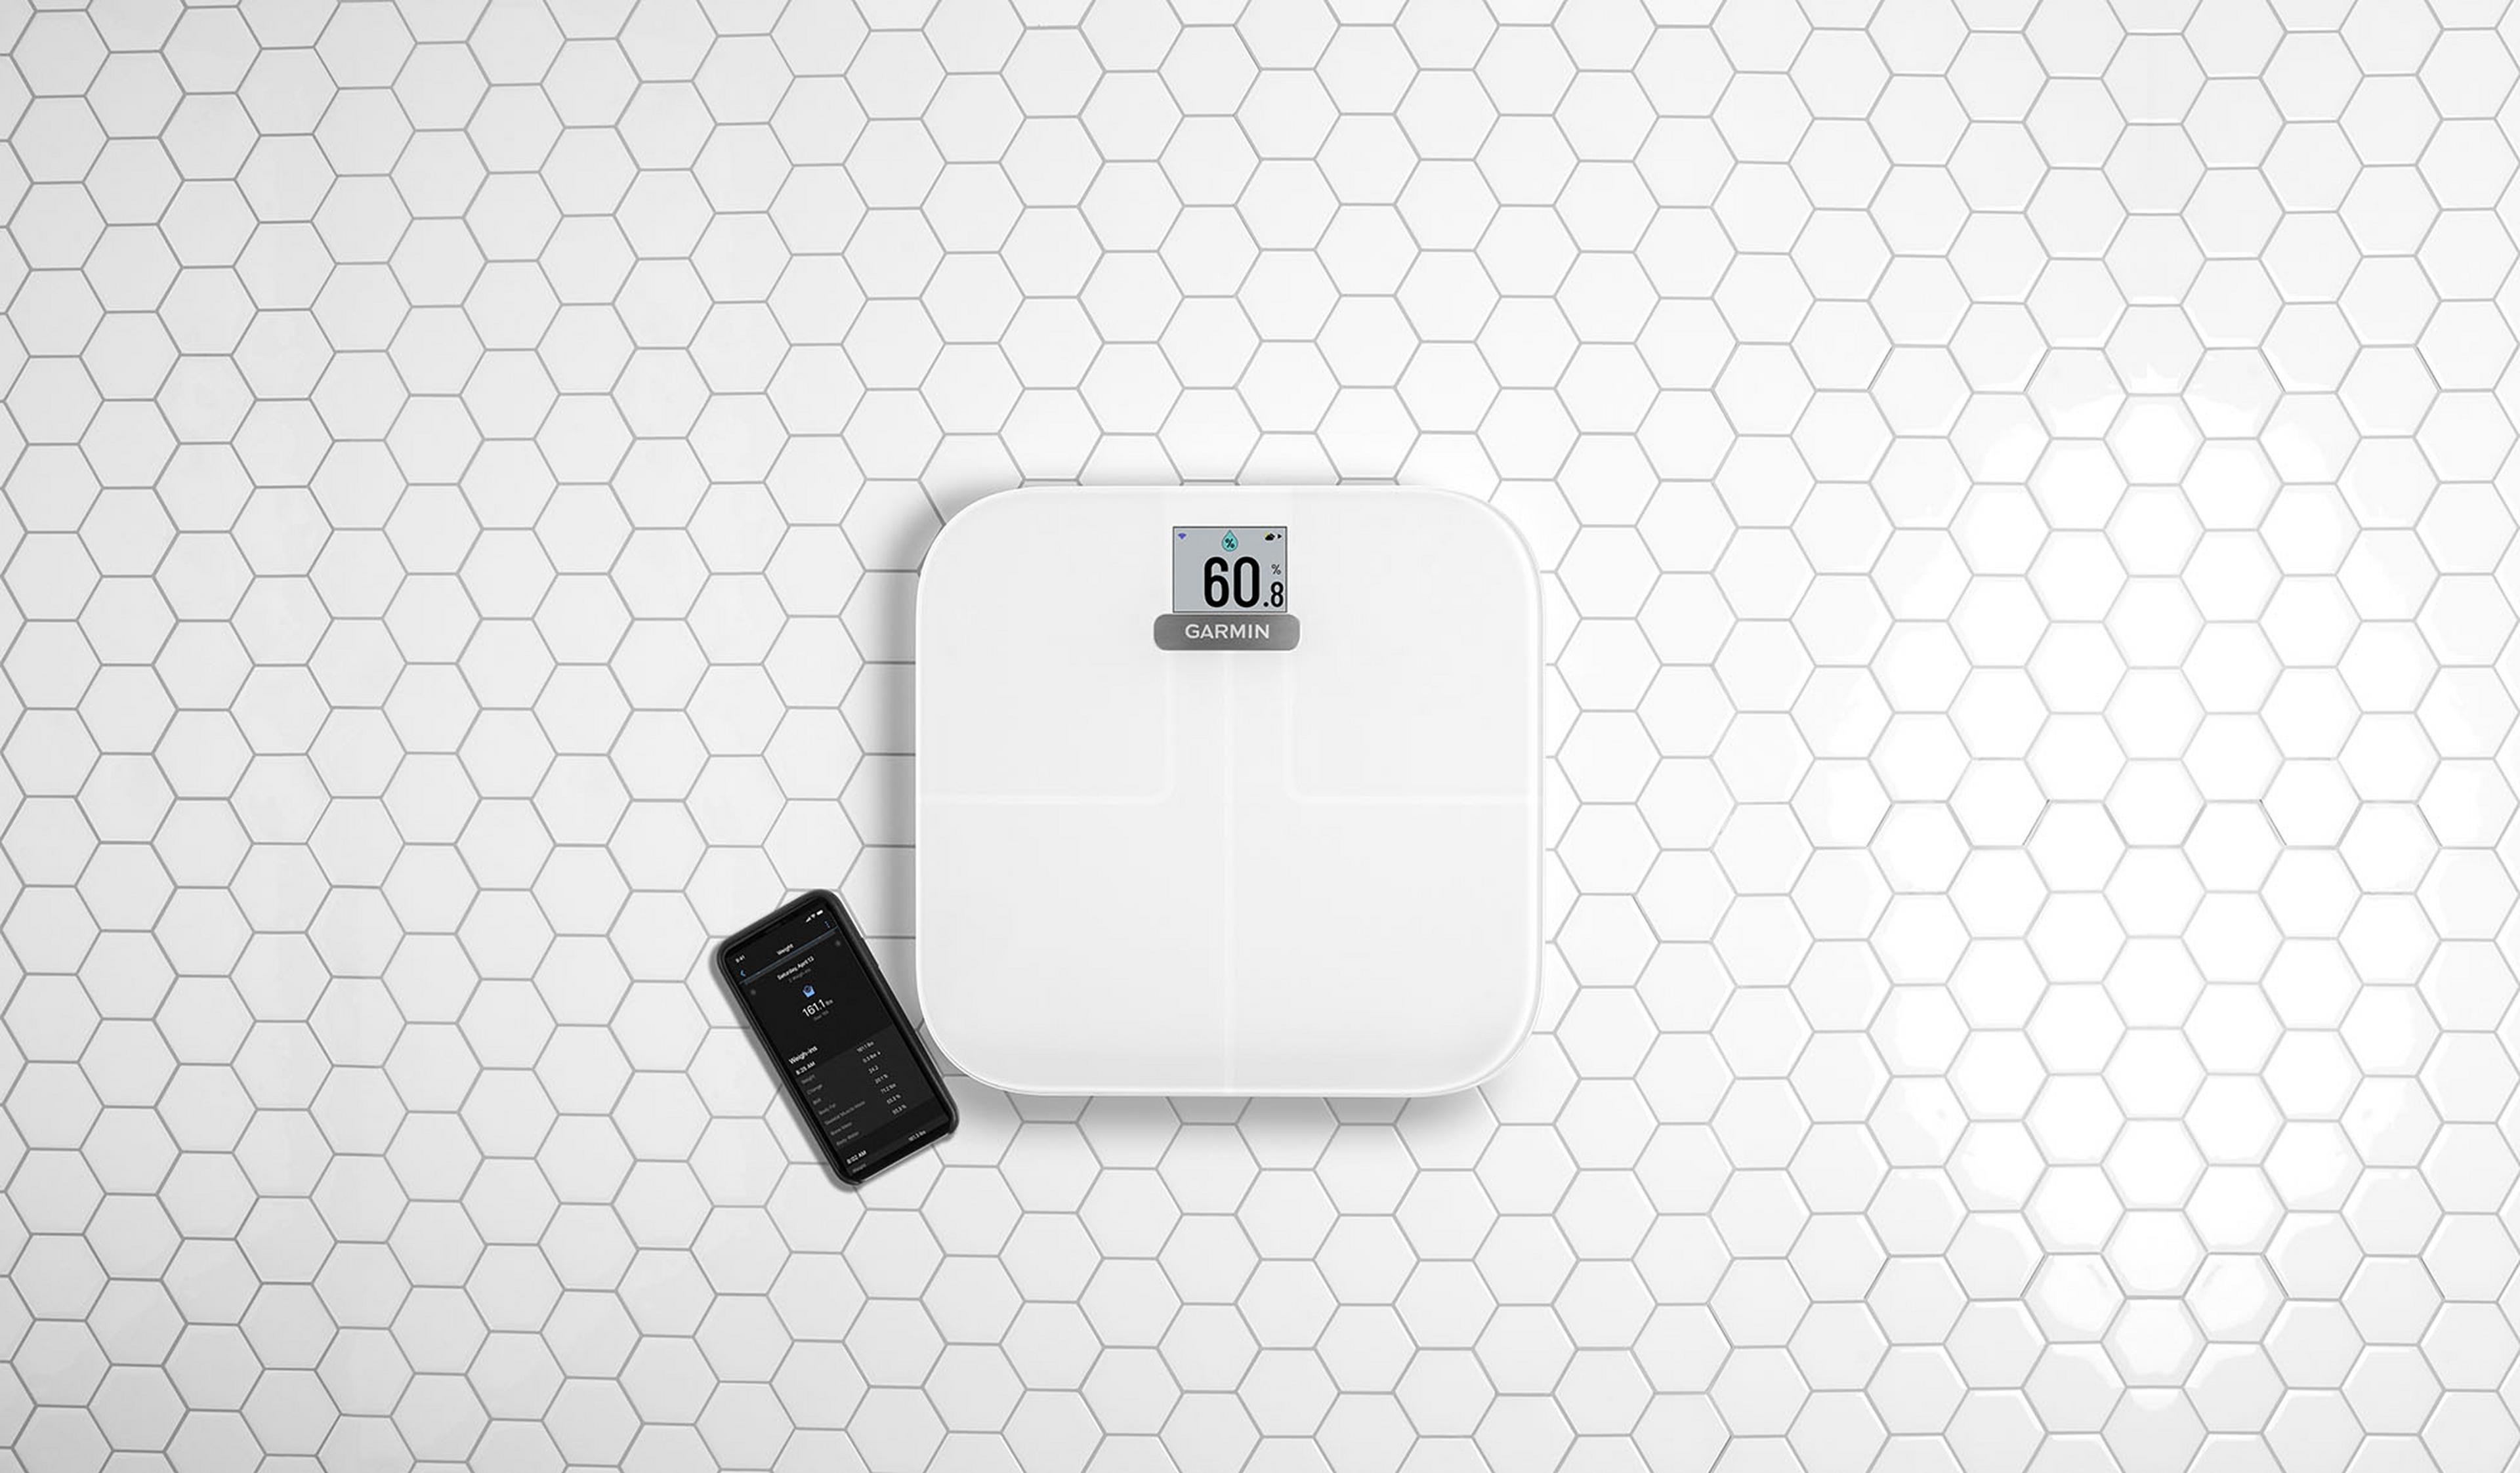 Will there be a new S3 smart scale launched soon? - Index S2 Smart